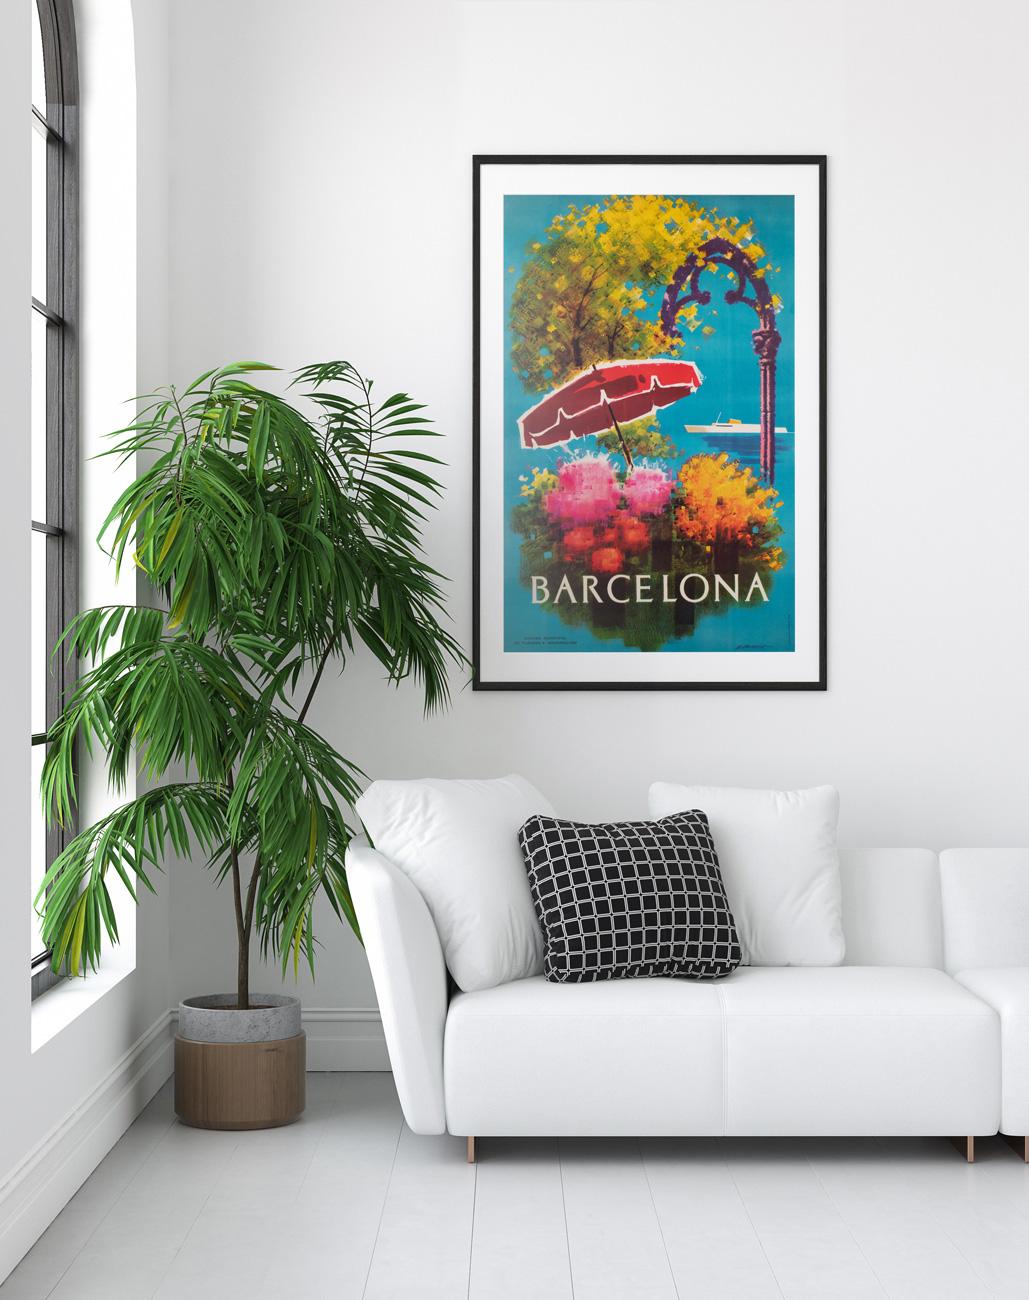 Fantastic original travel poster for Barcelona from the 1950s. Issued by the Municipal Office of Tourism and Information and featuring sumptuous, colourful artwork depicting a red sun umbrella above flowers in front of a tree with a sleek white ship